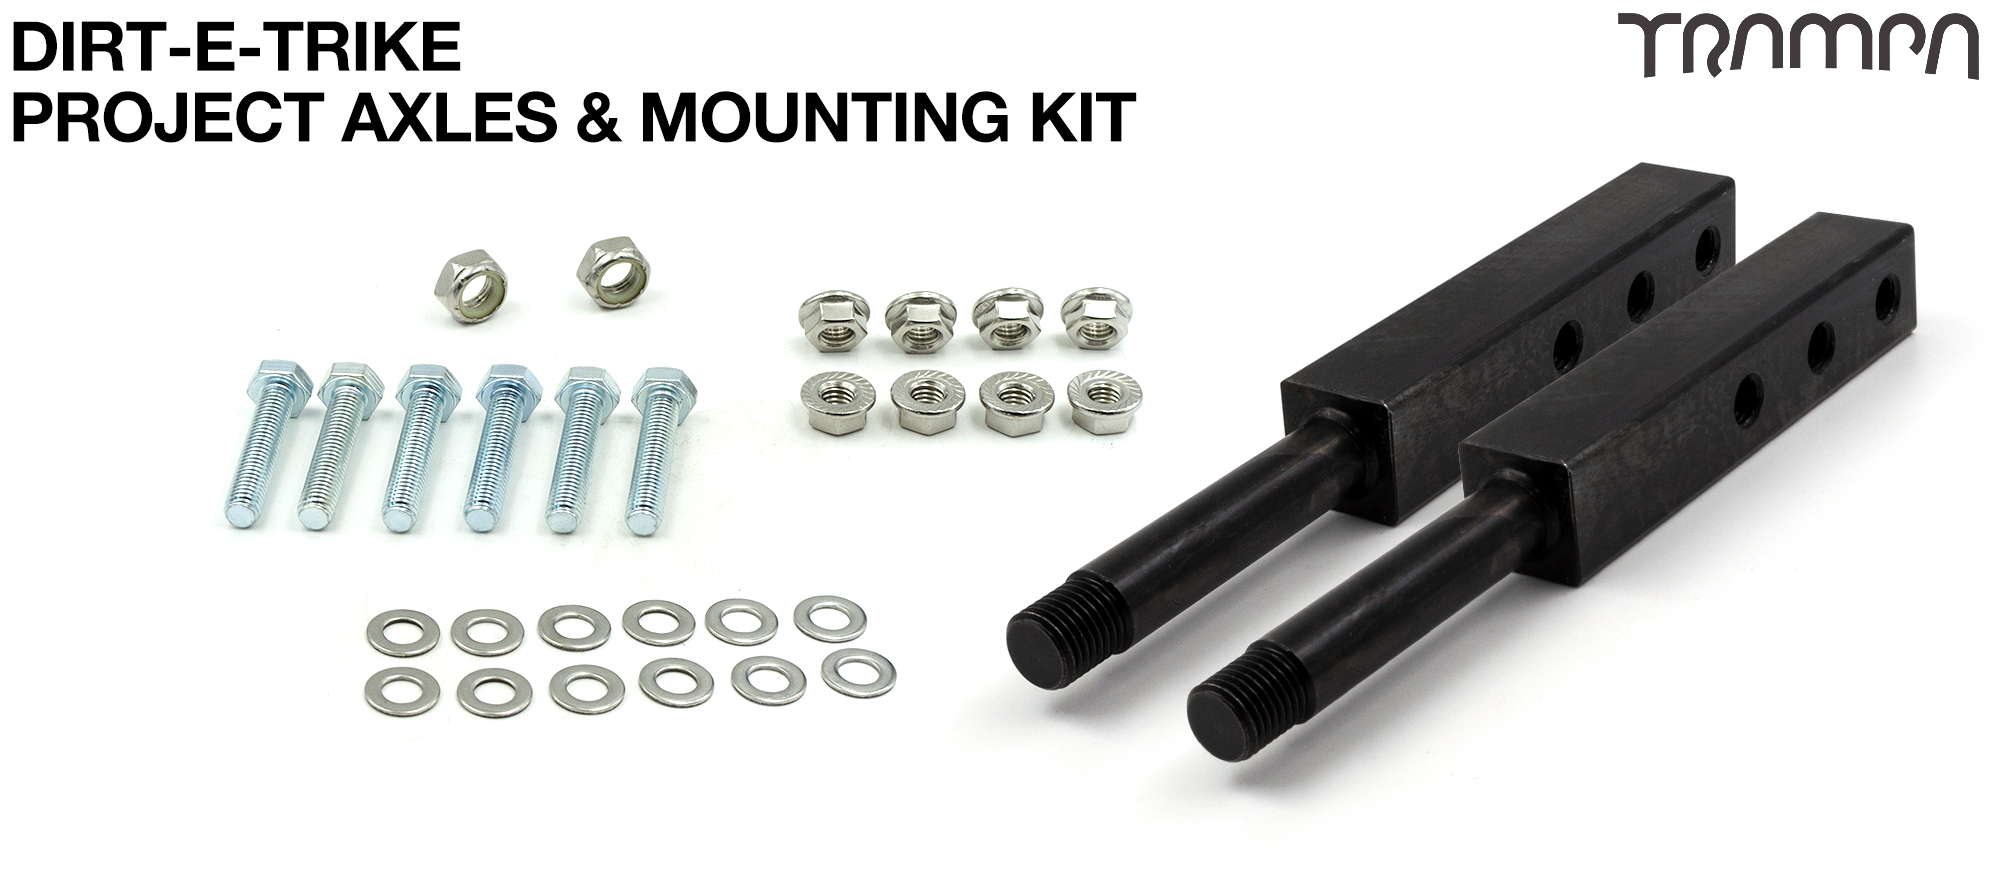 Dirt-E-Trike Project Axles & Mounting kit